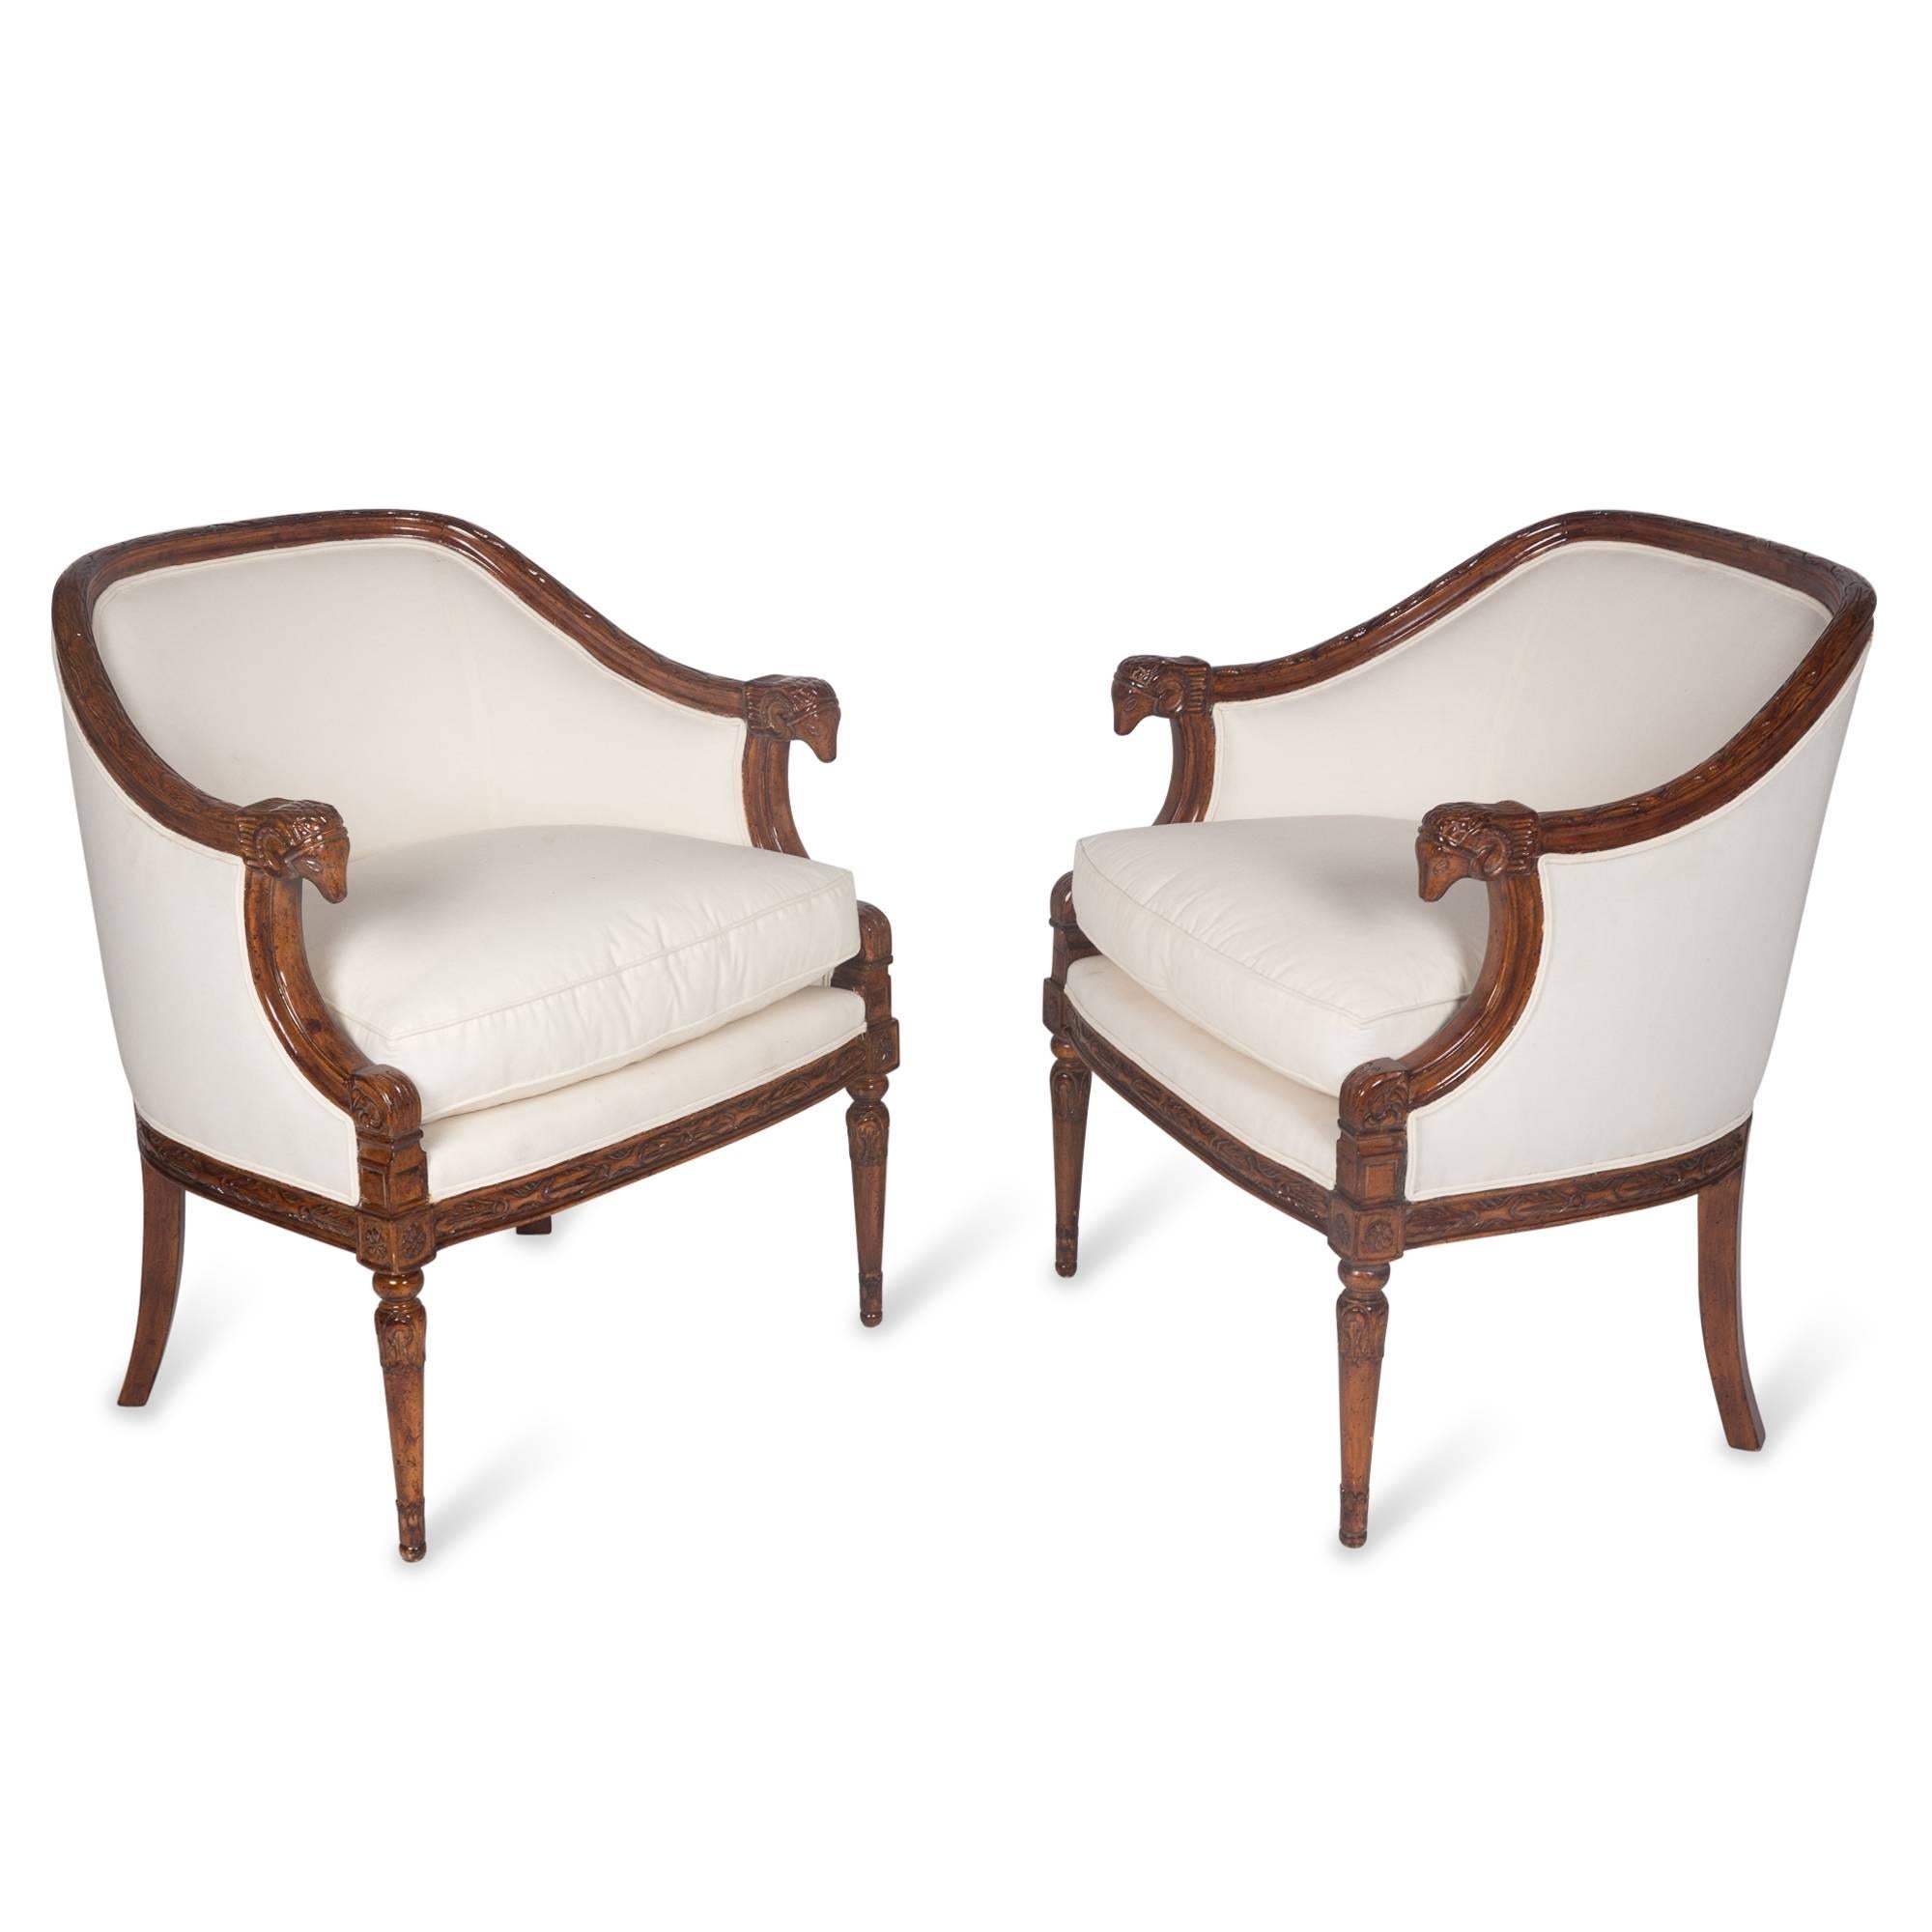 Pair of Carved Mahogany Armchairs, German, 1930s In Excellent Condition For Sale In Hoboken, NJ